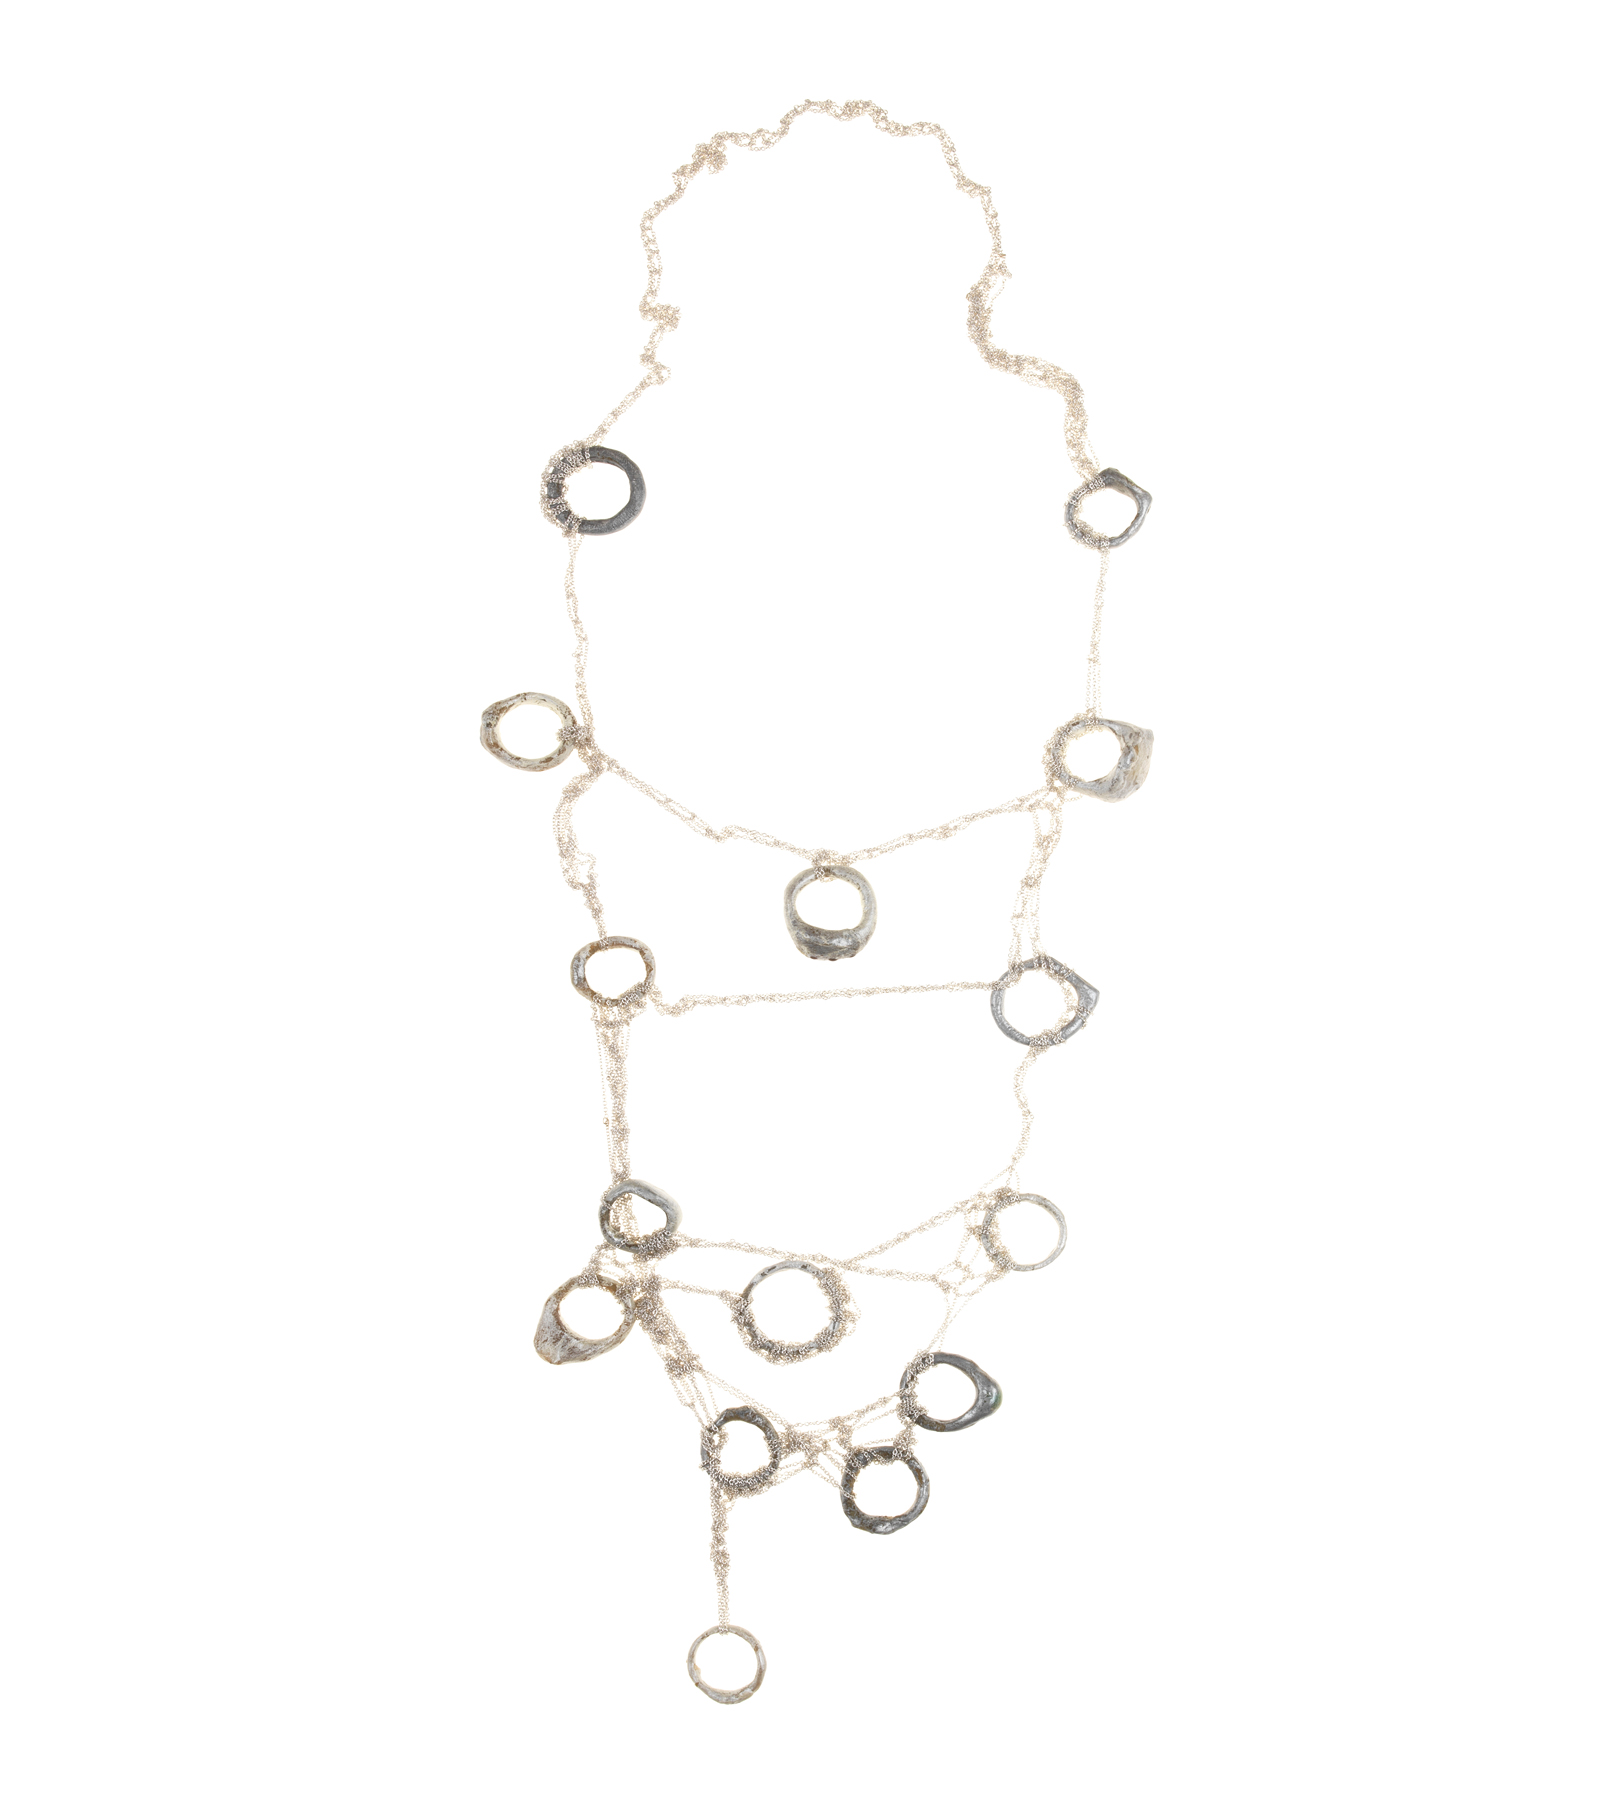 Untitled Necklace, 2015